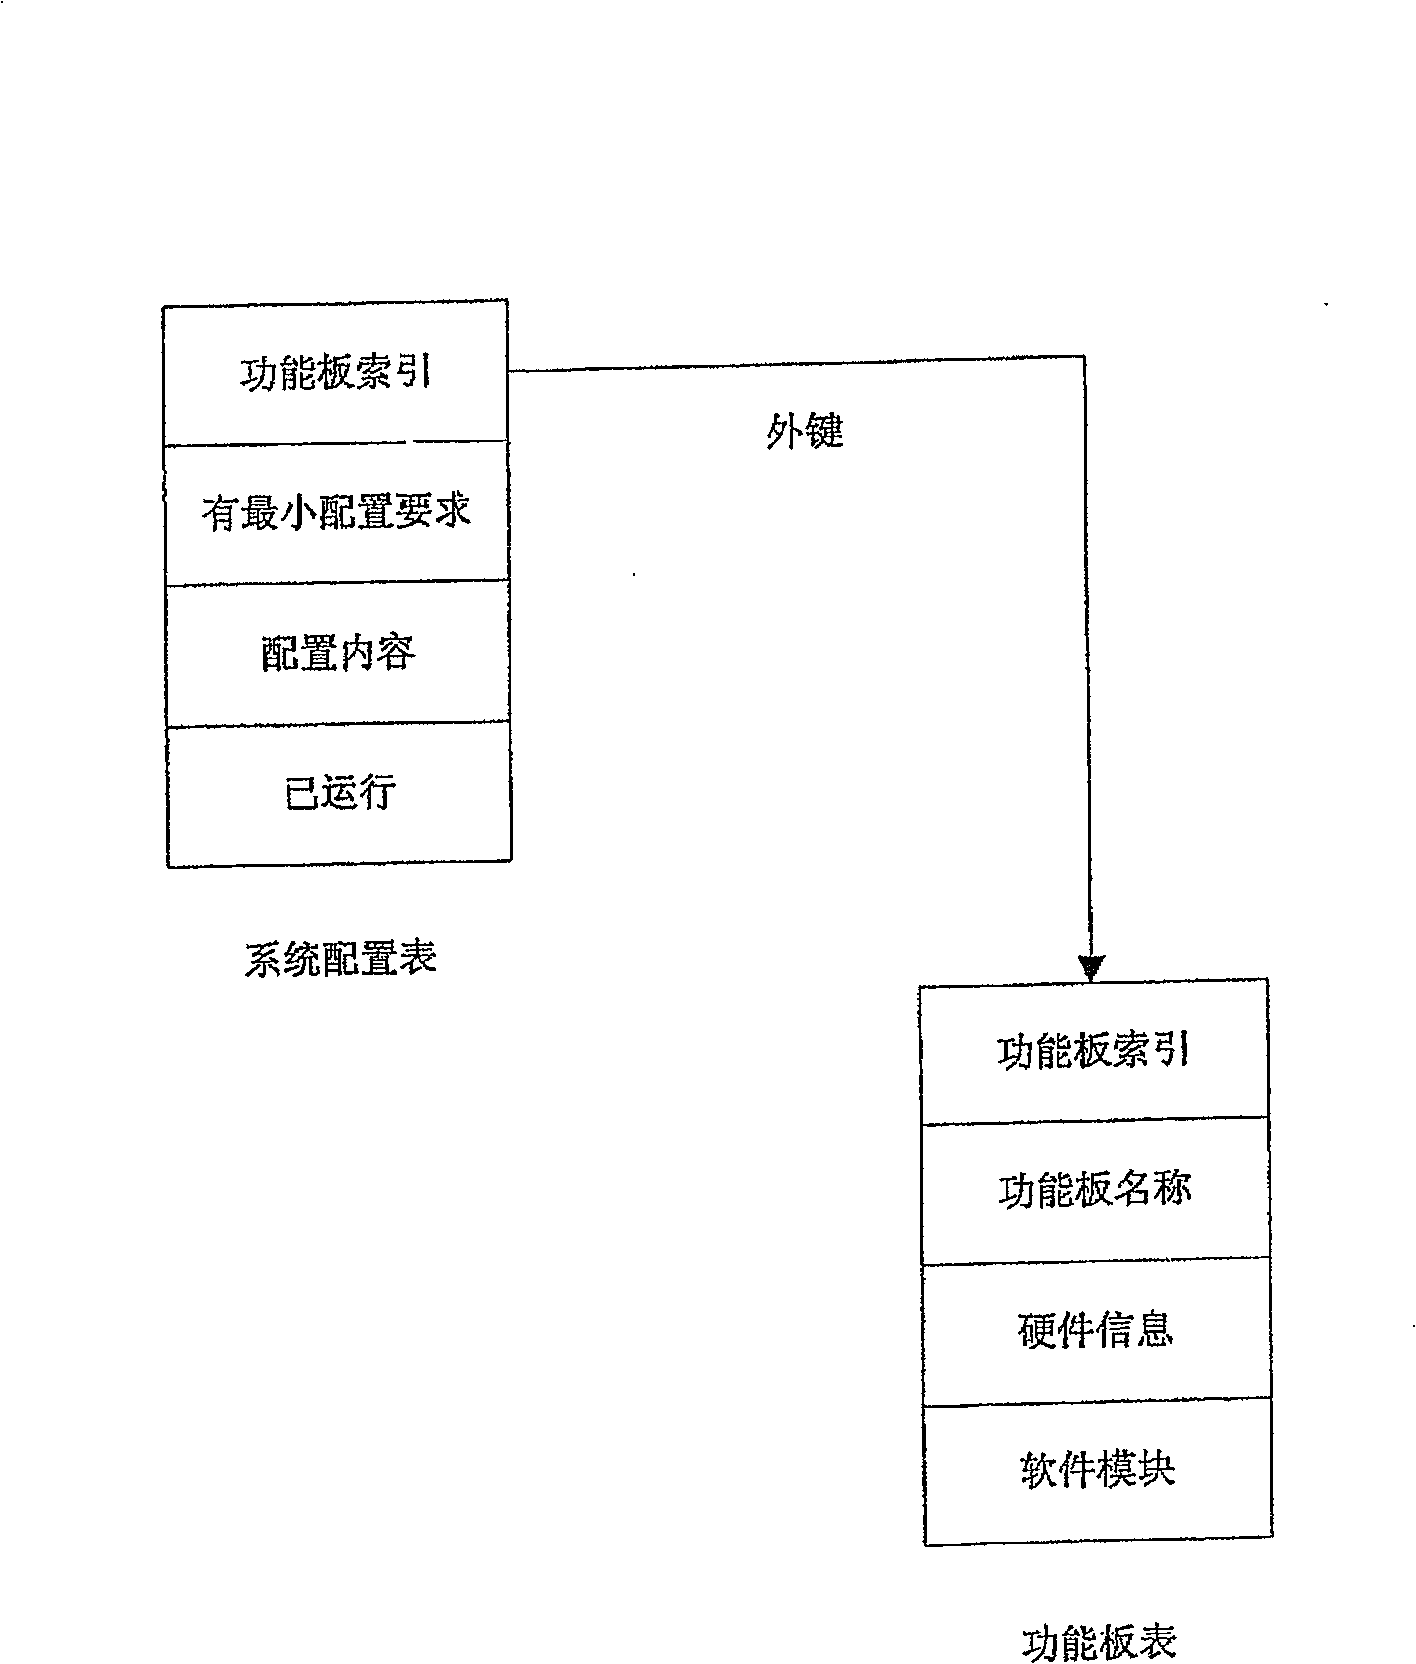 Method and system for realizing system configuration